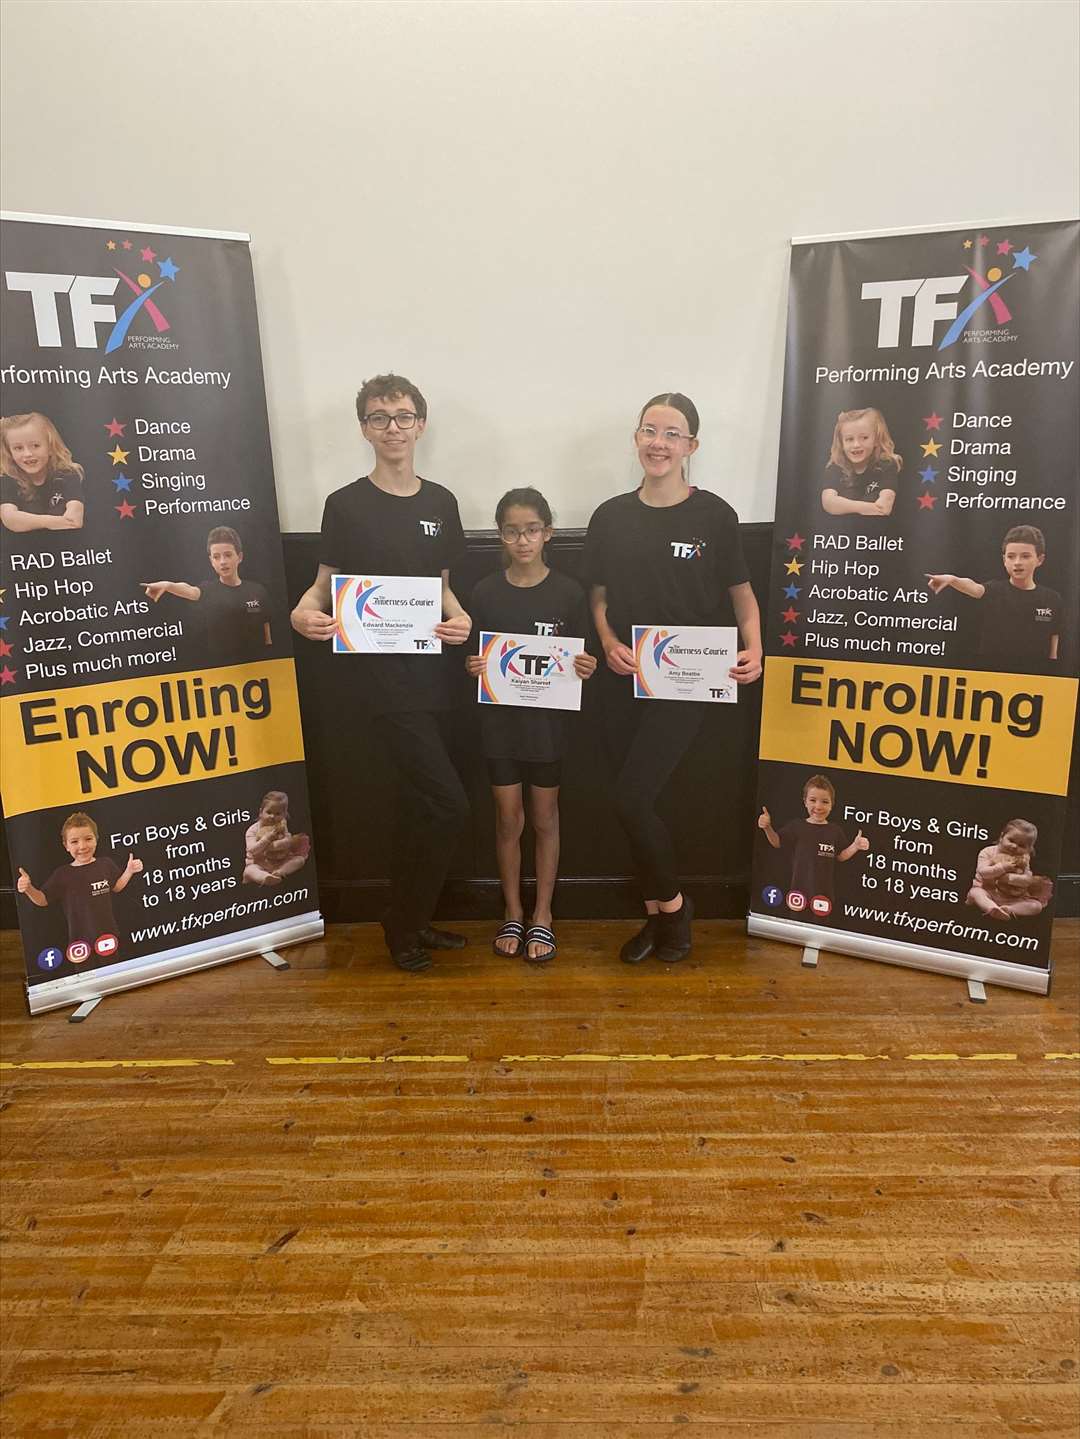 The winners of the TFX scholarship.  From left to right - Edward Mackenzie, Kaiyan Shareef, Amy Beattie.